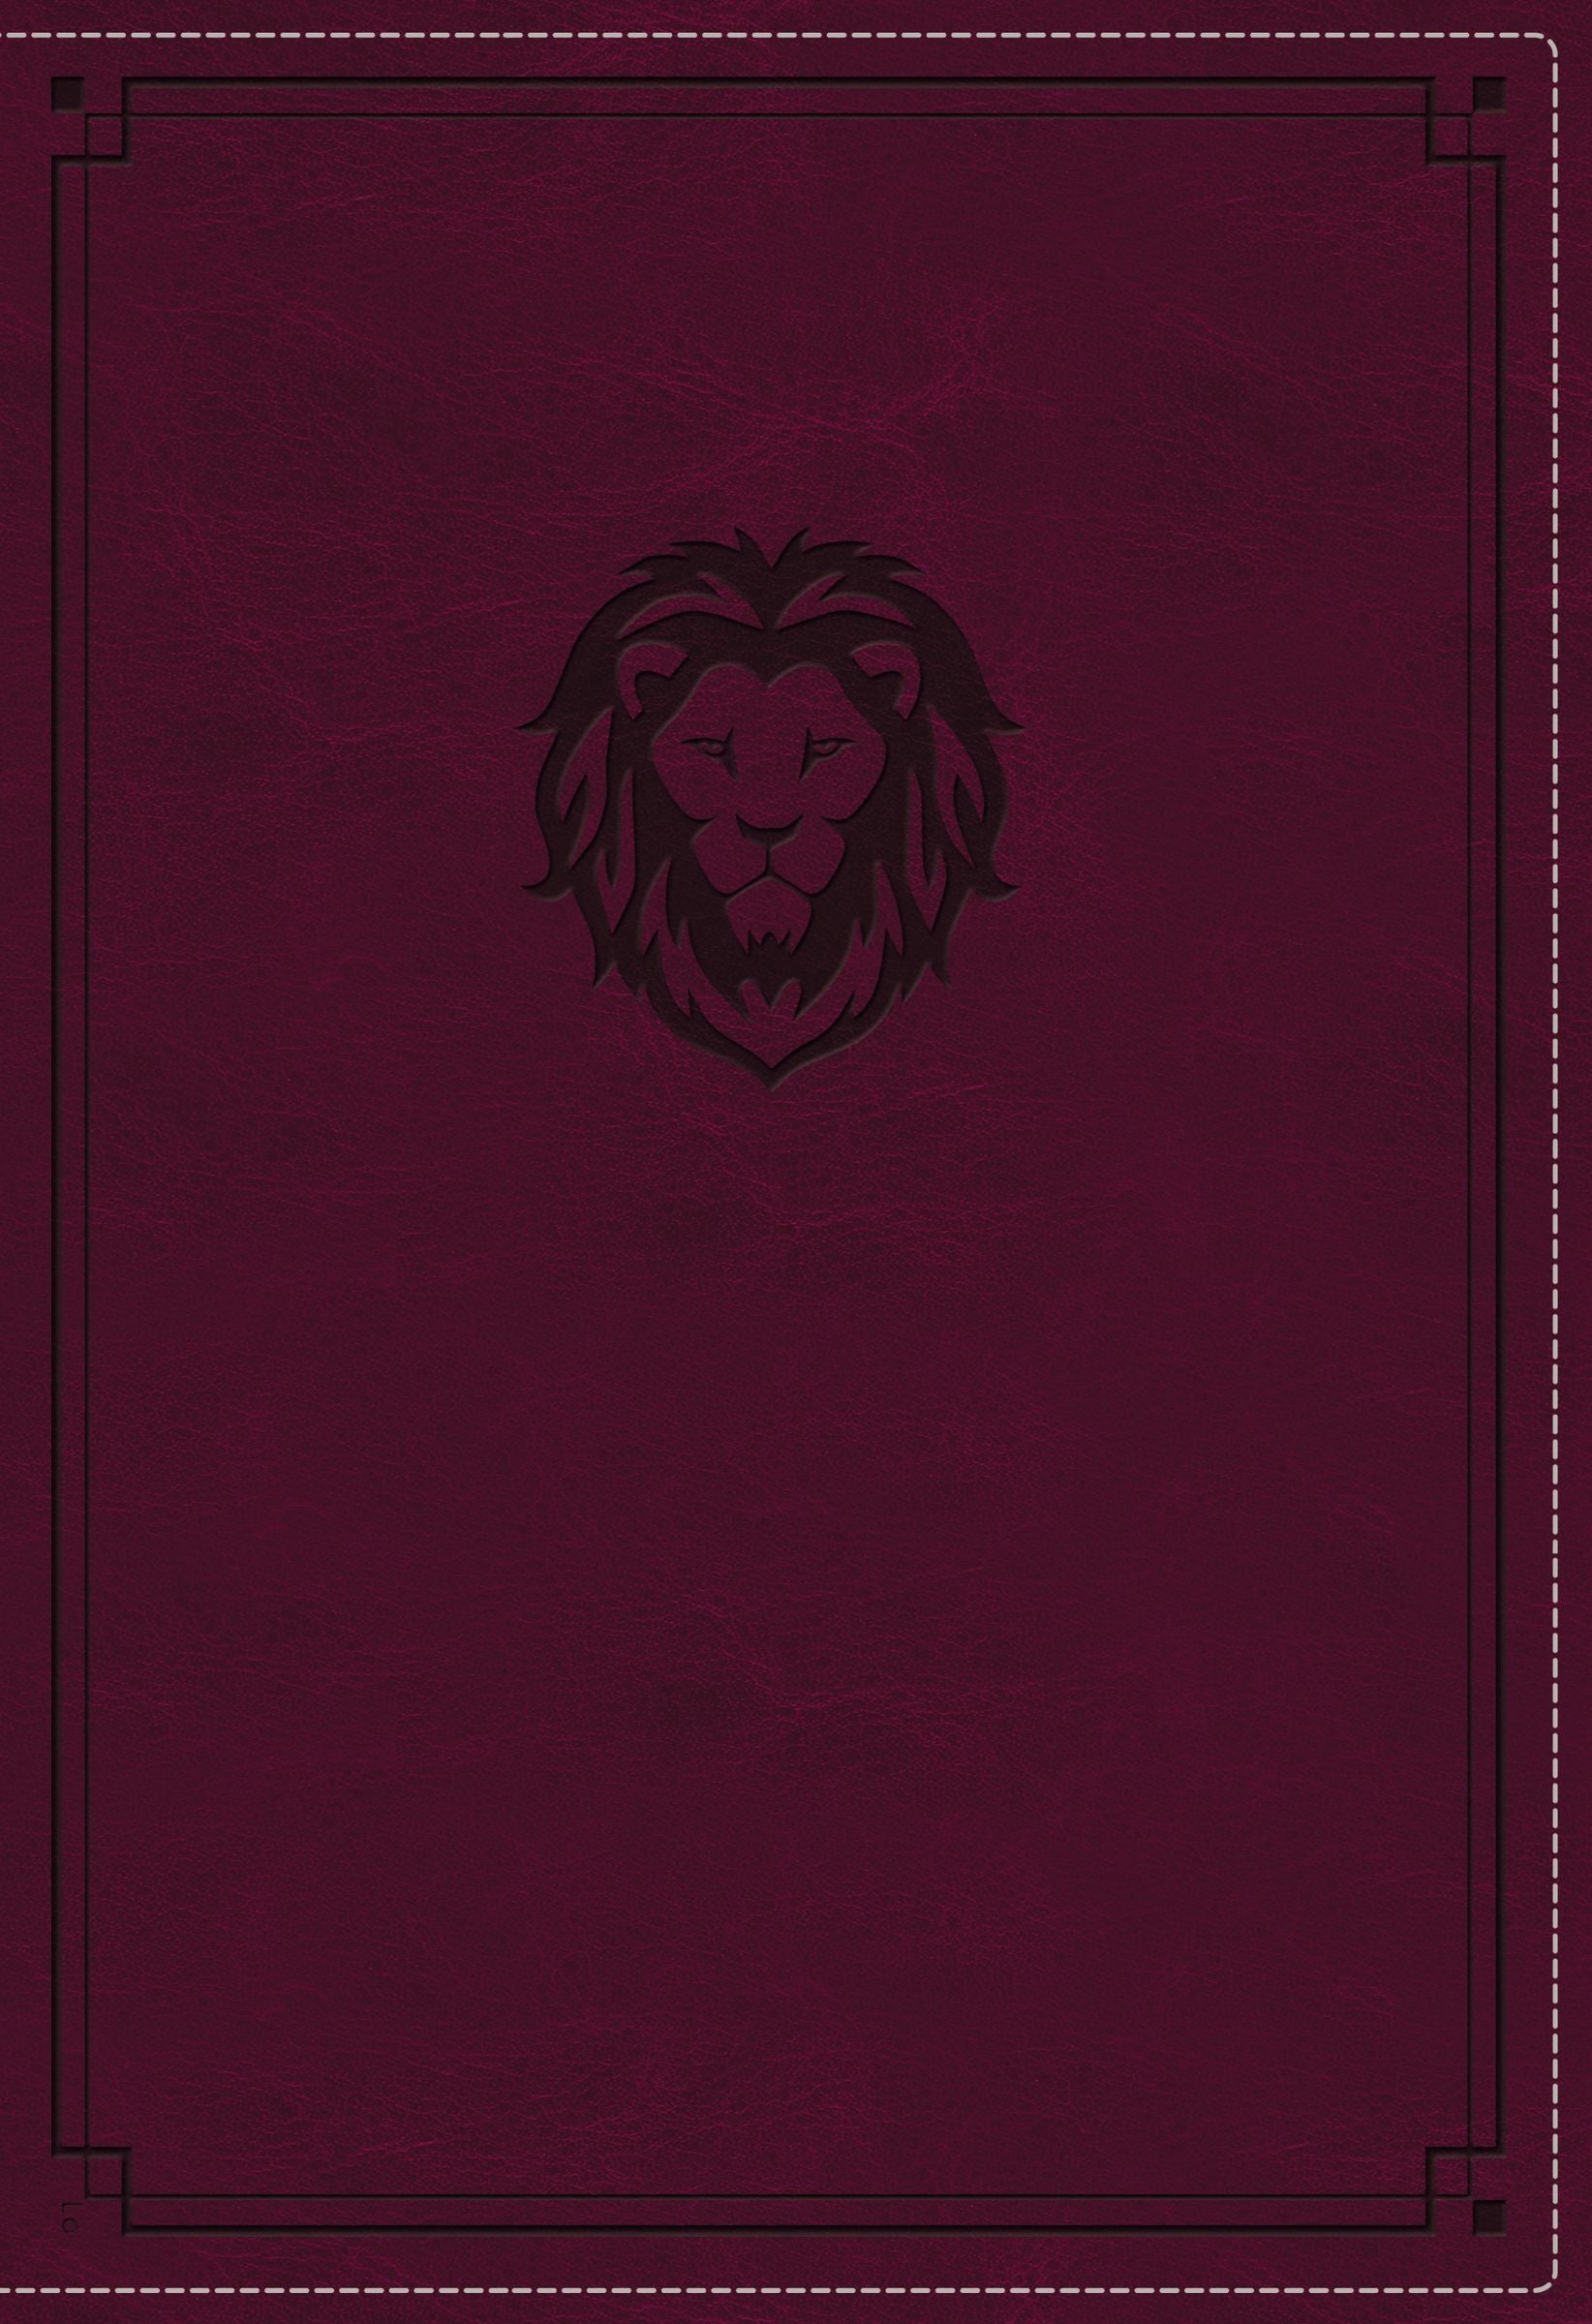 Image of KJV, Thinline Bible Youth Edition other